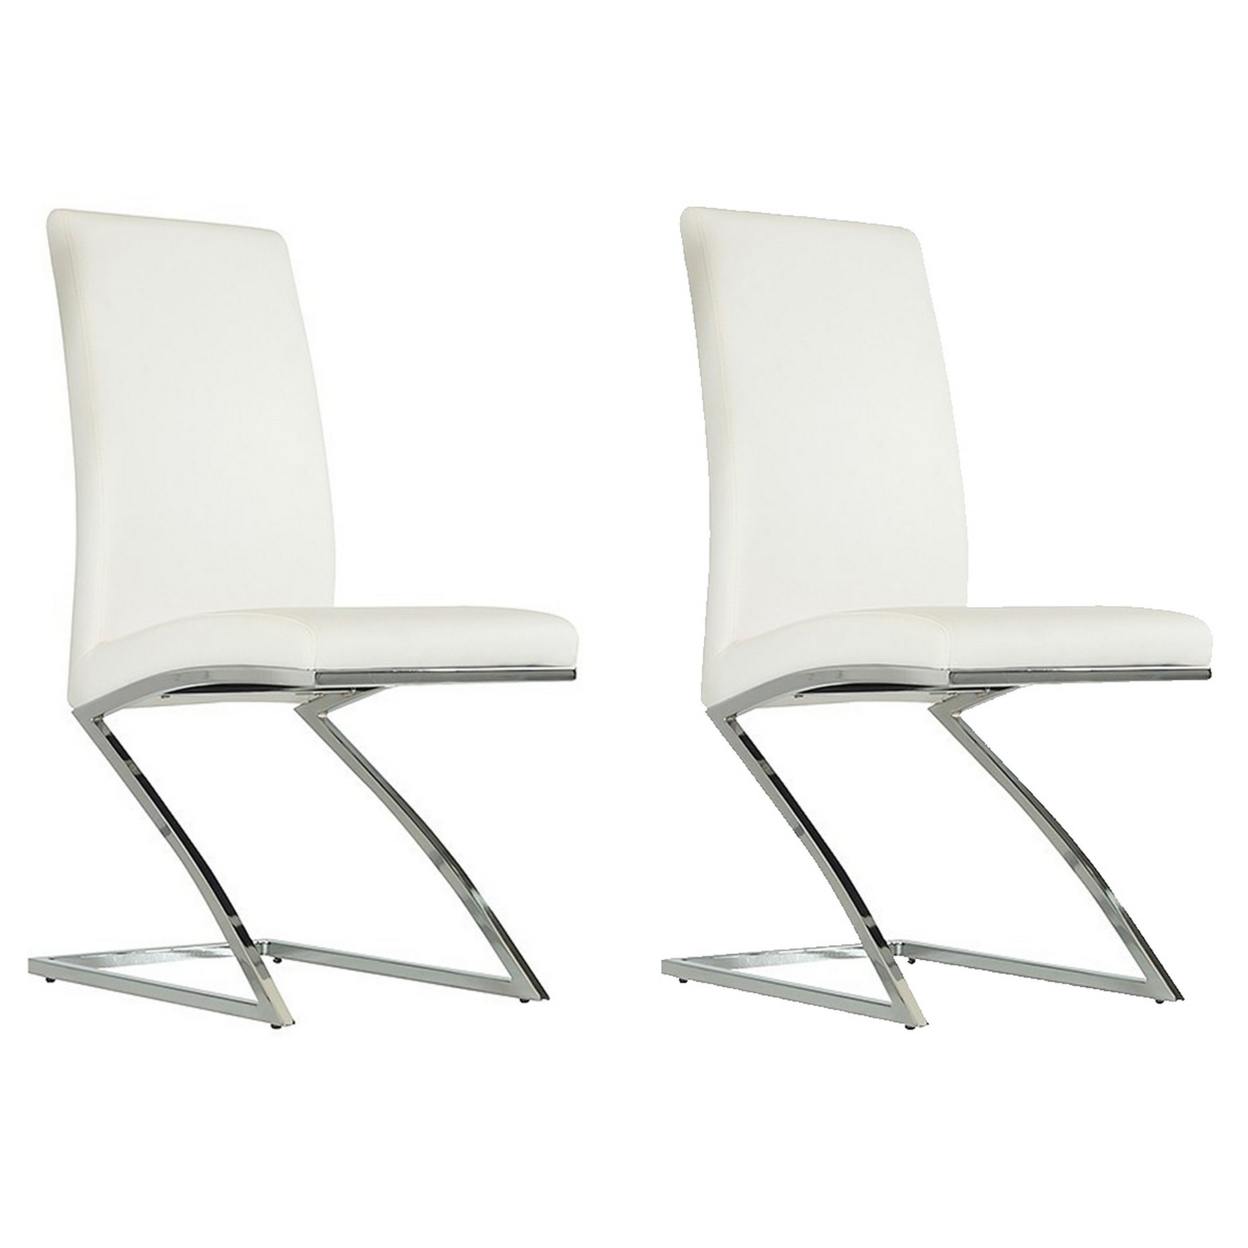 Leatherette Dining Chair With Z Shape Metal Base, Set Of 2, White And Chrome- Saltoro Sherpi